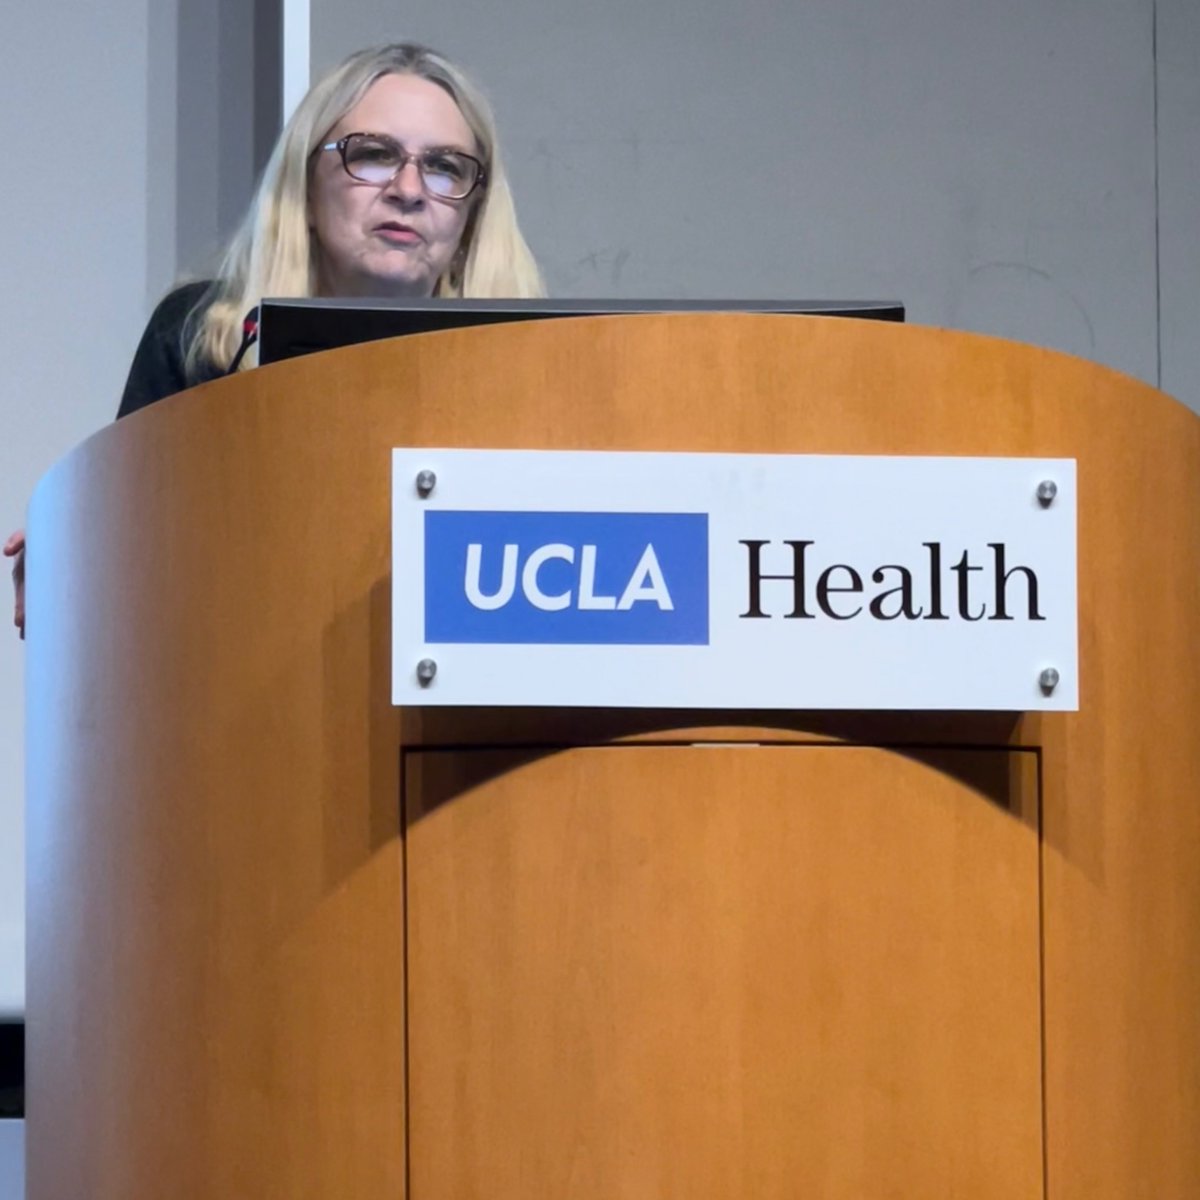 #PalliativeCare Symposium day! Kicking it off with an intro from our @UCLAPalliative CNS @jeanniemouse1 who makes this all happen year after year. #HPM #HaPC